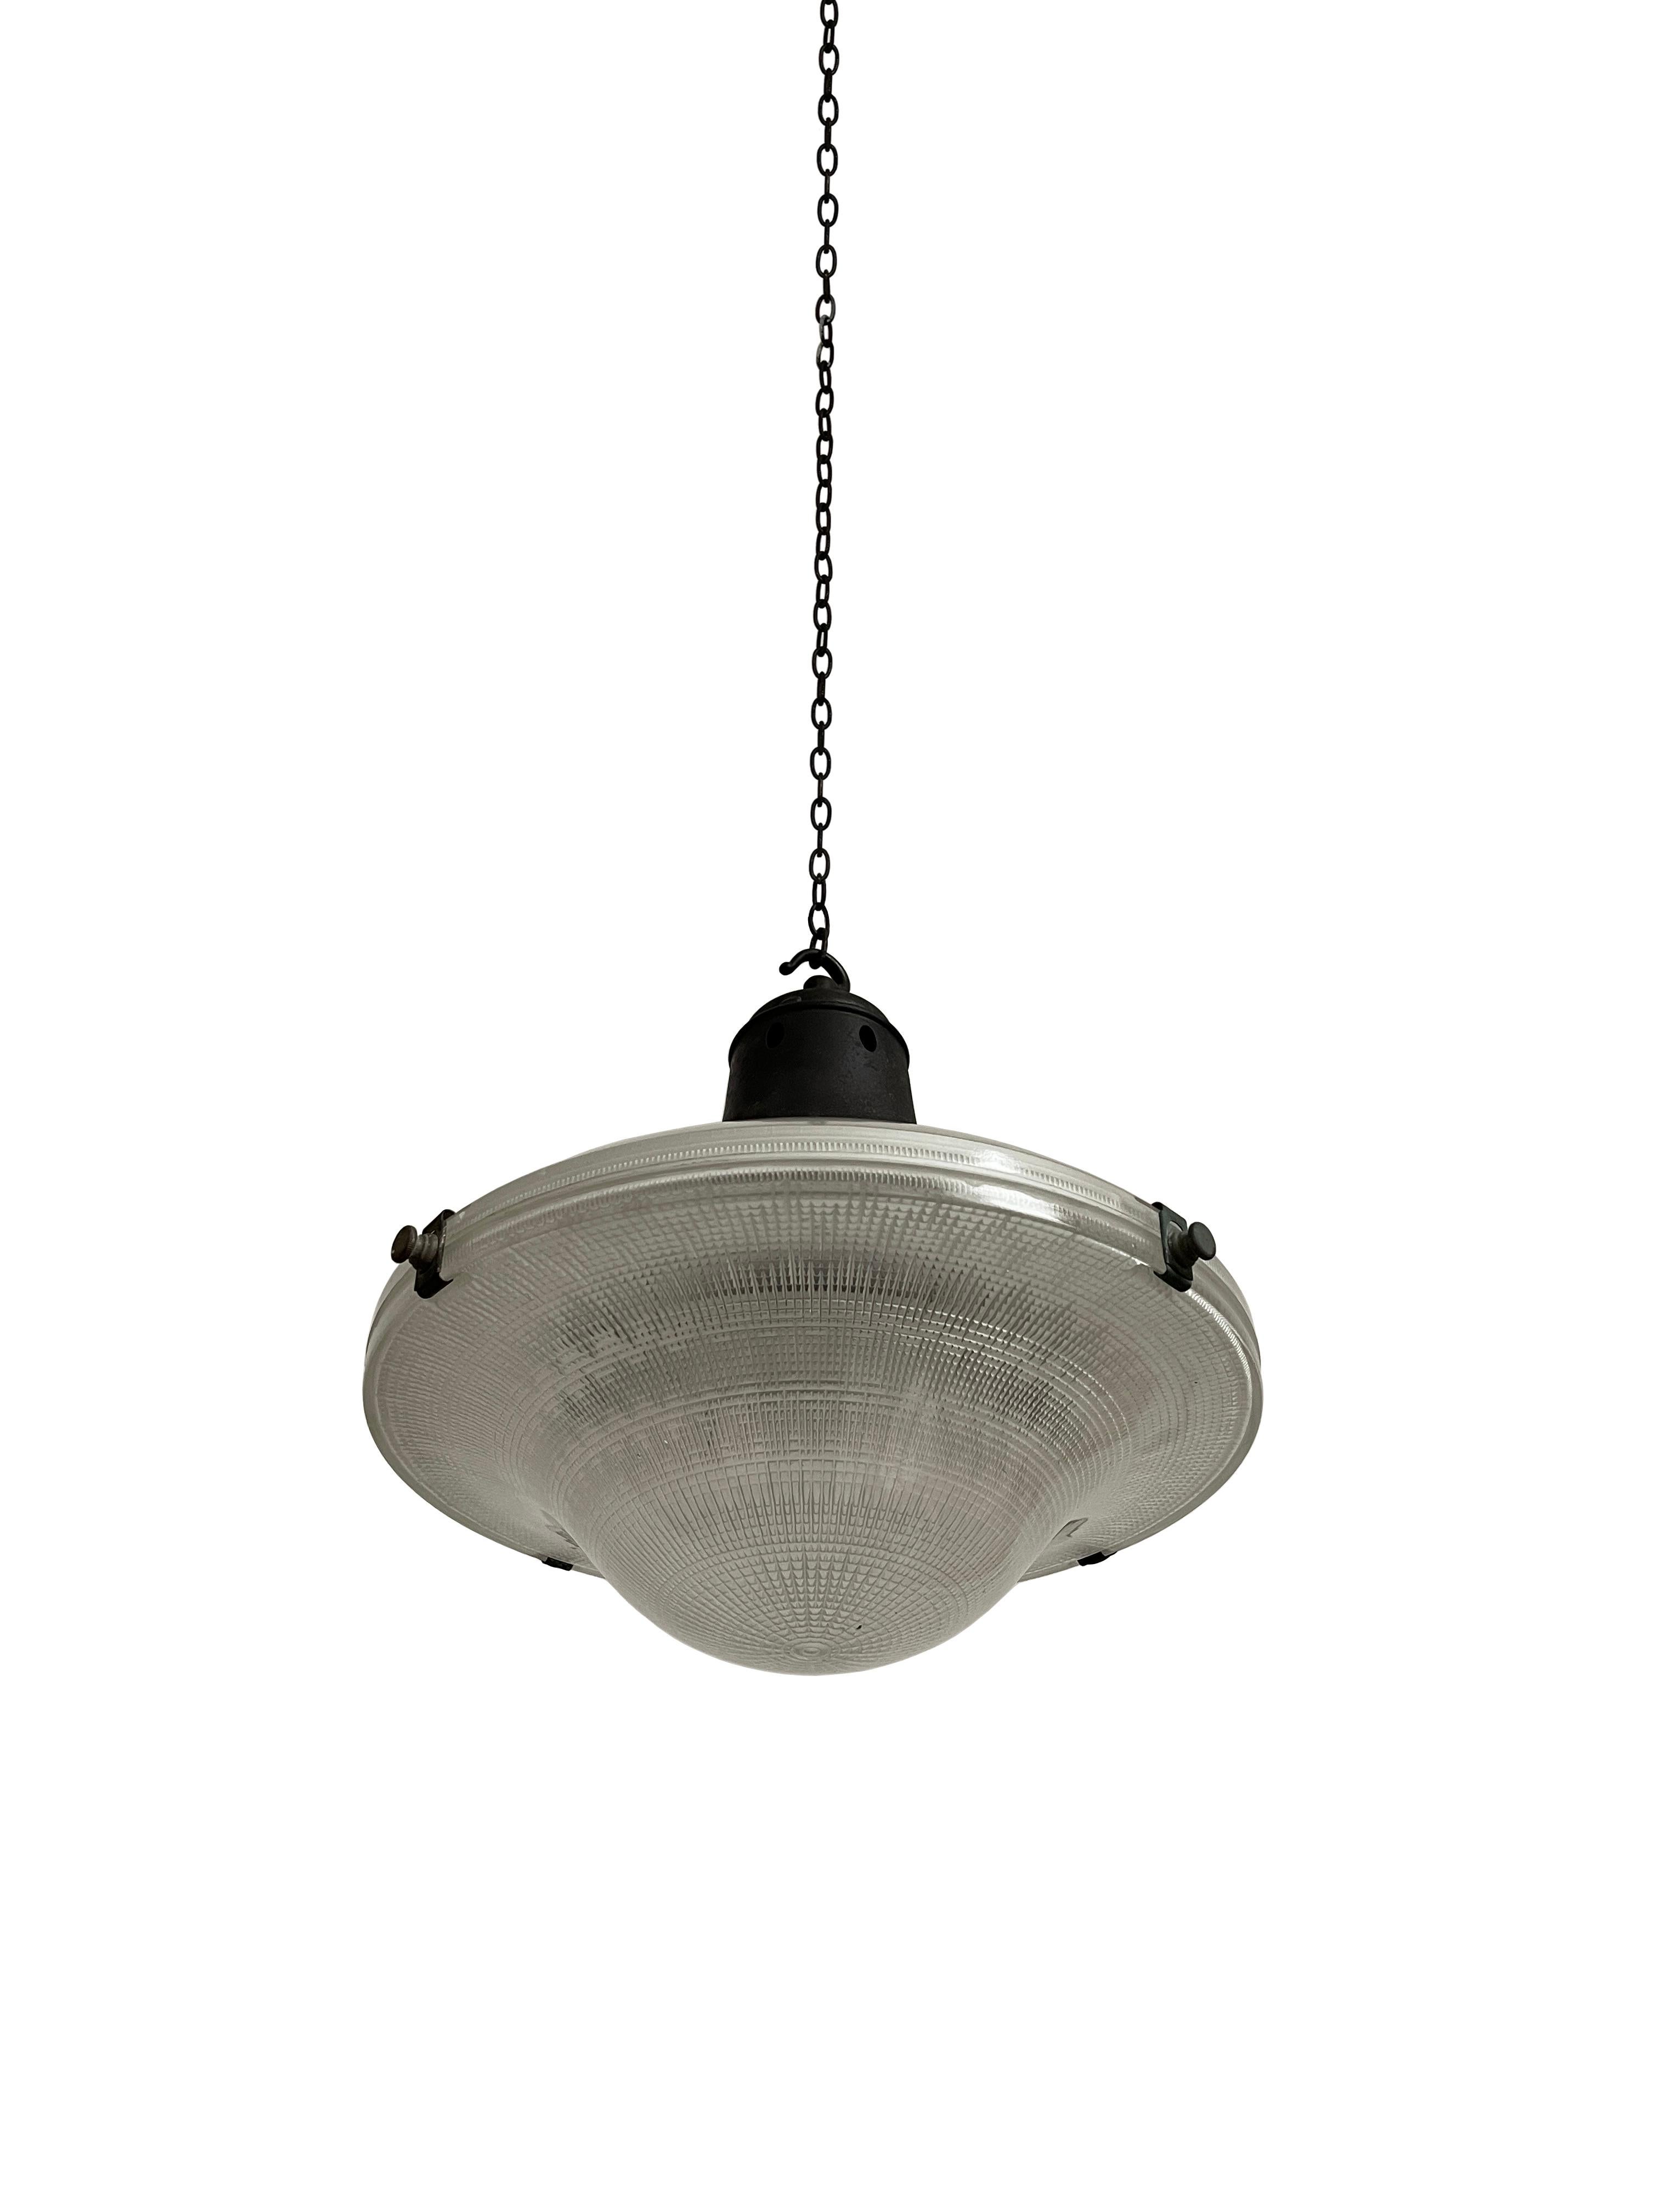 - A large Sistrah pendant with opaline and clear glass designed by Otto Müller, Germany circa 1930.
- A unique characteristic of the lamp is that it consists of five glass elements, the upper section being opaline and the transparent concentric